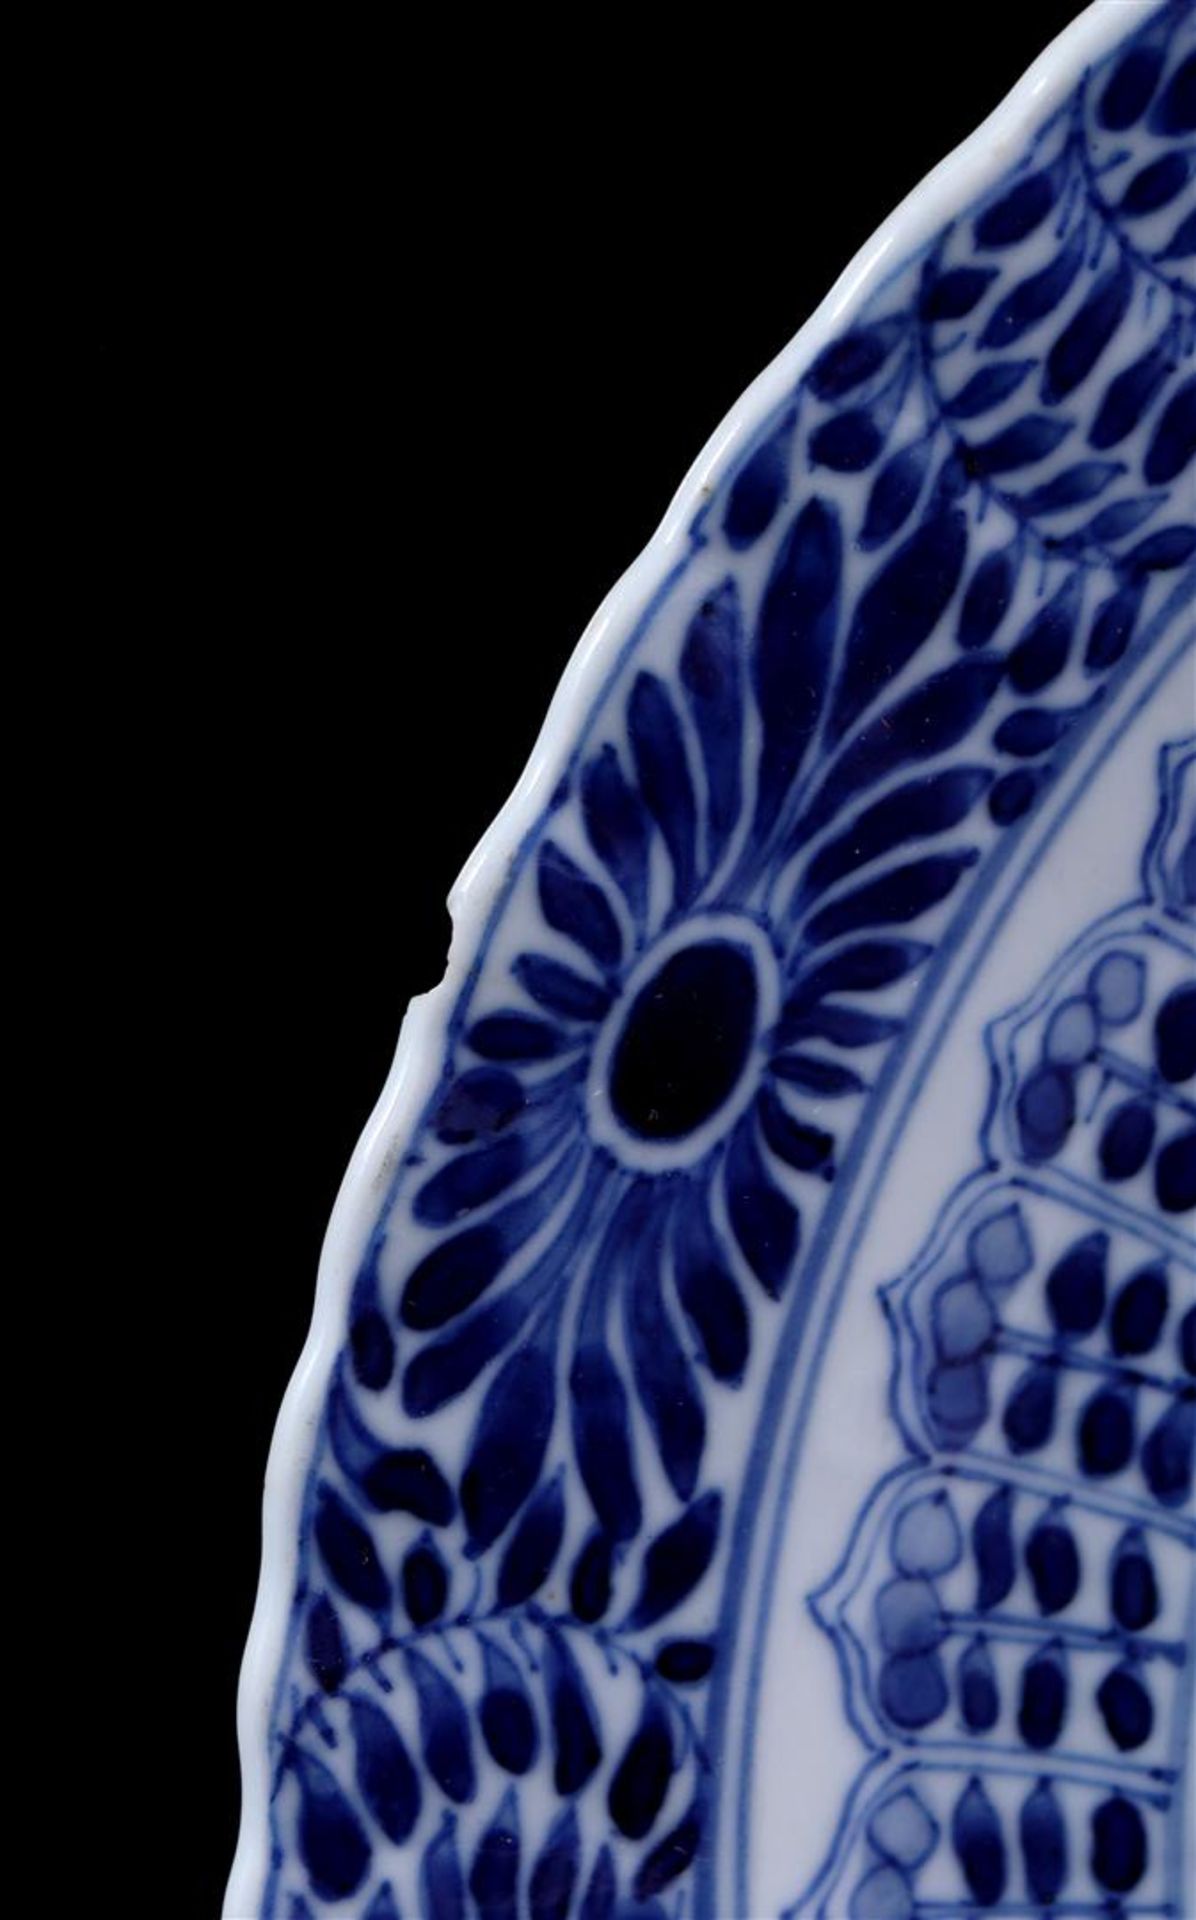 Porcelain dish with blue and white fish décor - Image 3 of 8